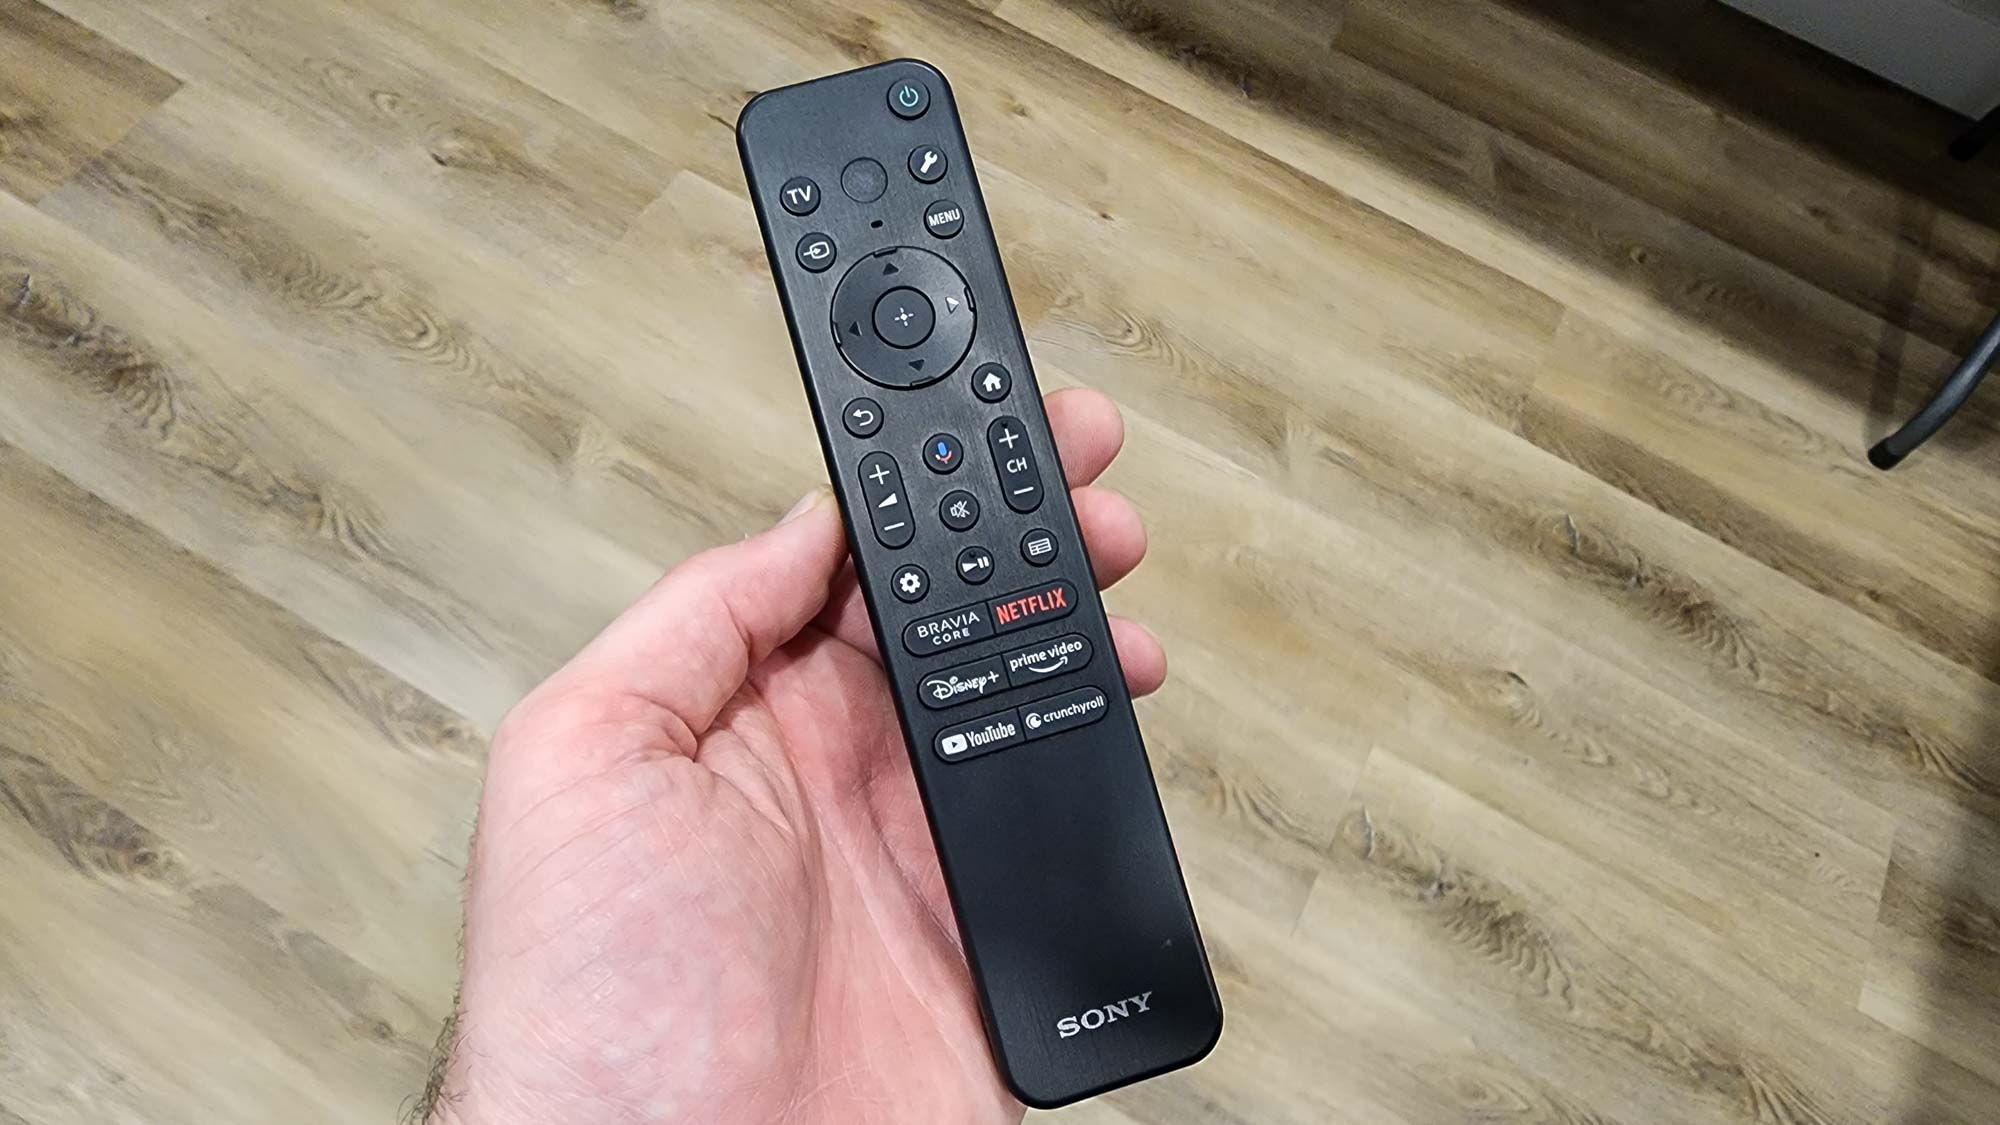 Crunchyroll Button to Be Featured on 2023 Sony BRAVIA TV Remotes -  Crunchyroll News